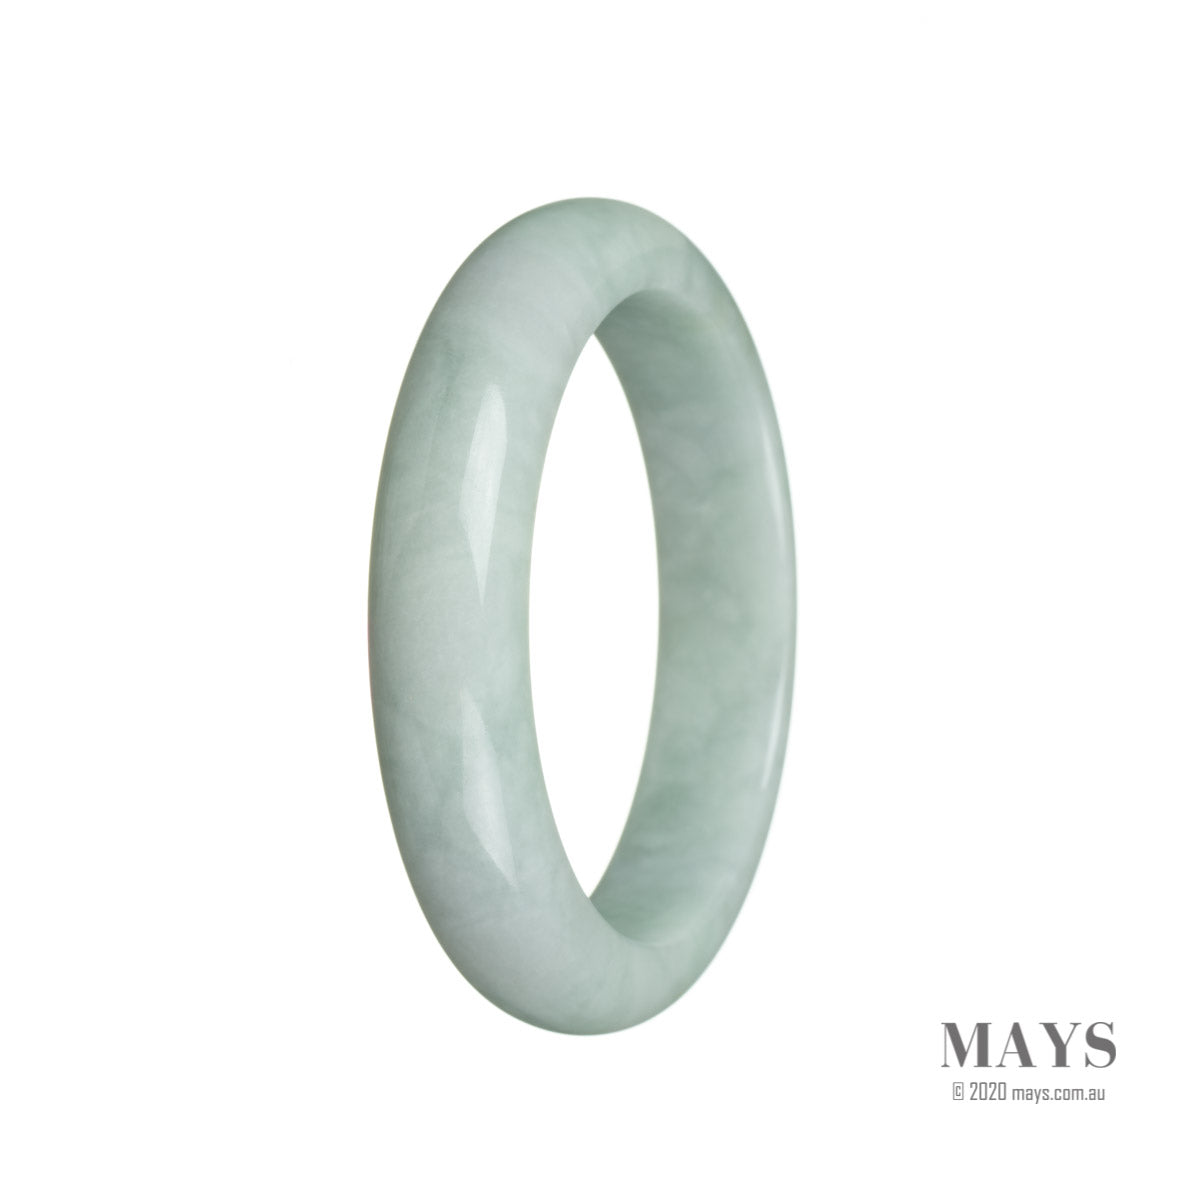 A close-up of a genuine untreated white jade bangle, featuring a semi-round shape and measuring 57mm in diameter. The bangle has a smooth and polished surface, showcasing the natural beauty of the white jade. It is a timeless and elegant piece of jewelry from the brand MAYS.